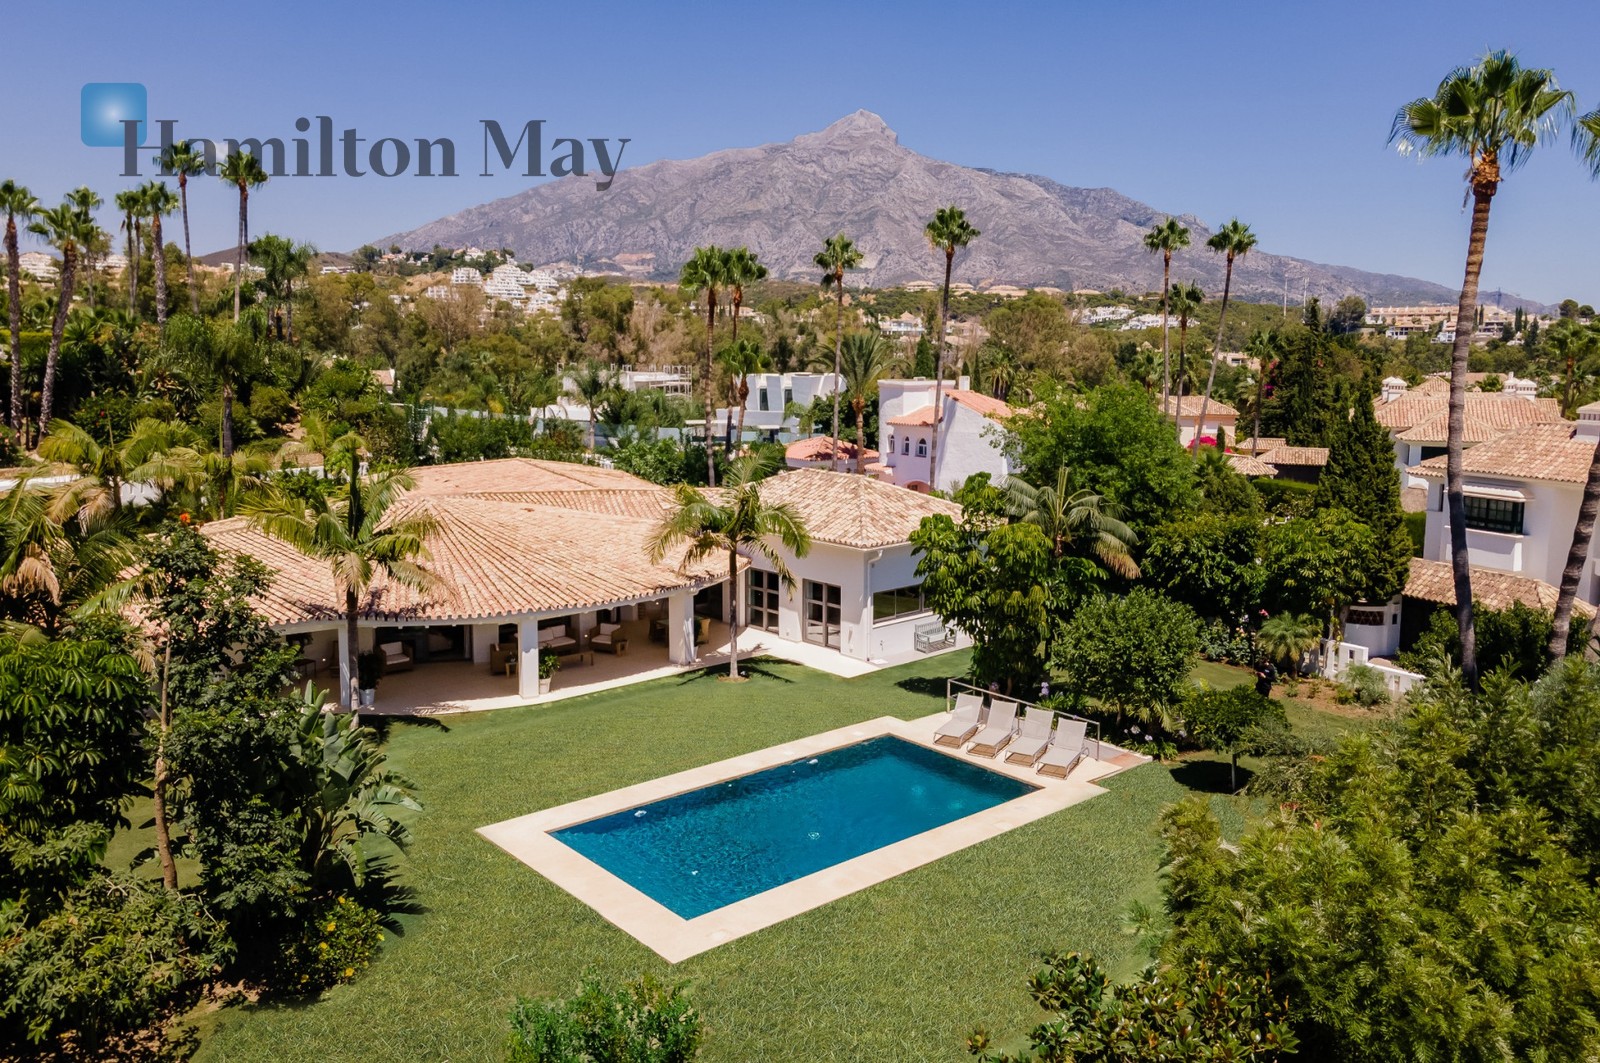 Elegant five bedroom saouth facing villa situated second line golf in La Cerquilla. The area is dominated by luxury villas and surrounded by golf courses.